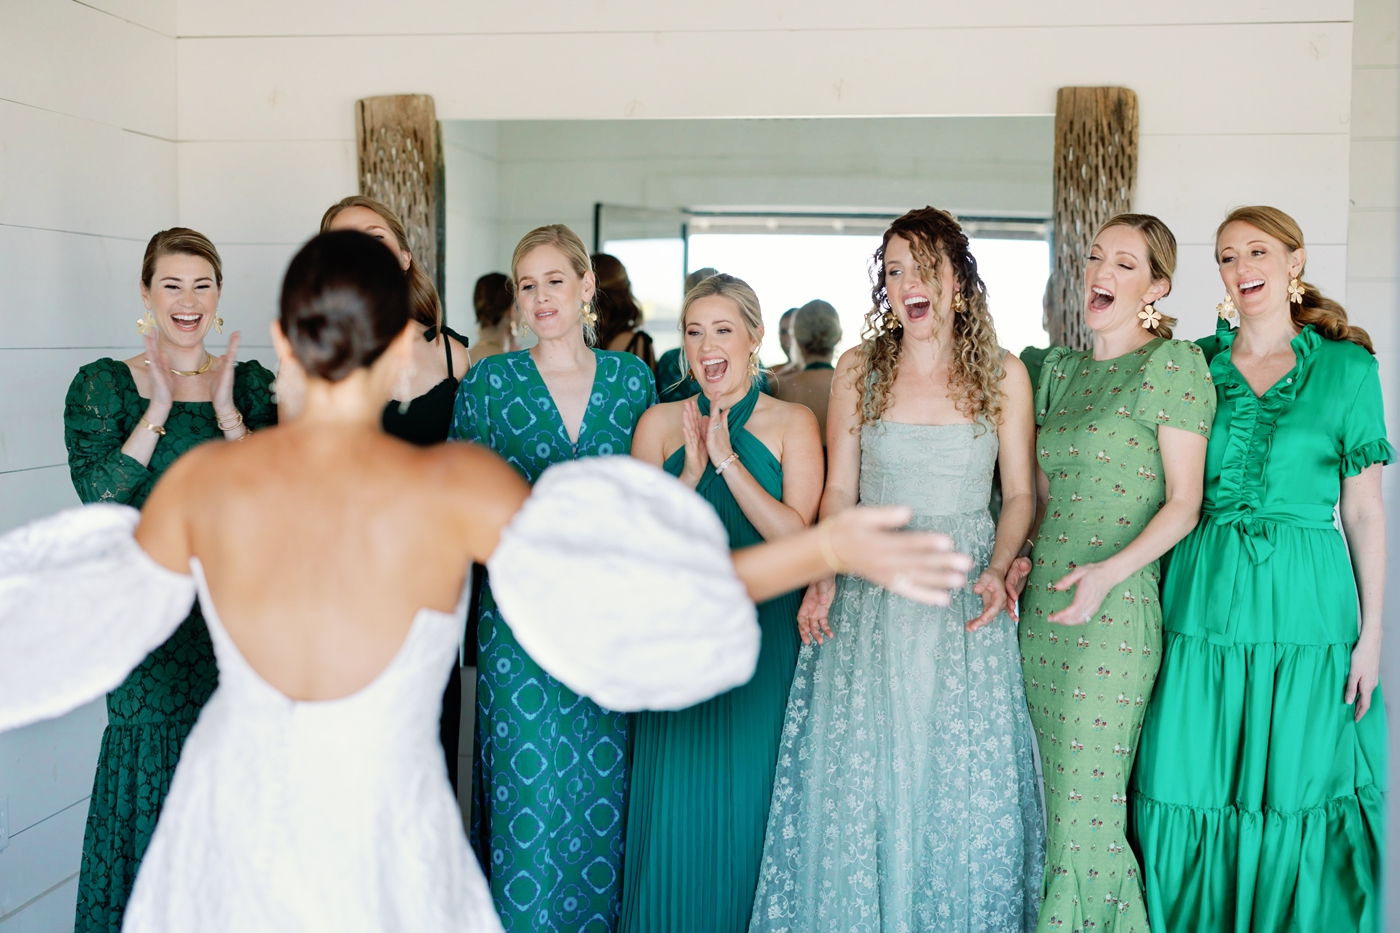 Bride showing her bridesmaids her wedding dress, the Melrose gown by Lela Rose, an embroidered ballgown with puff sleeves